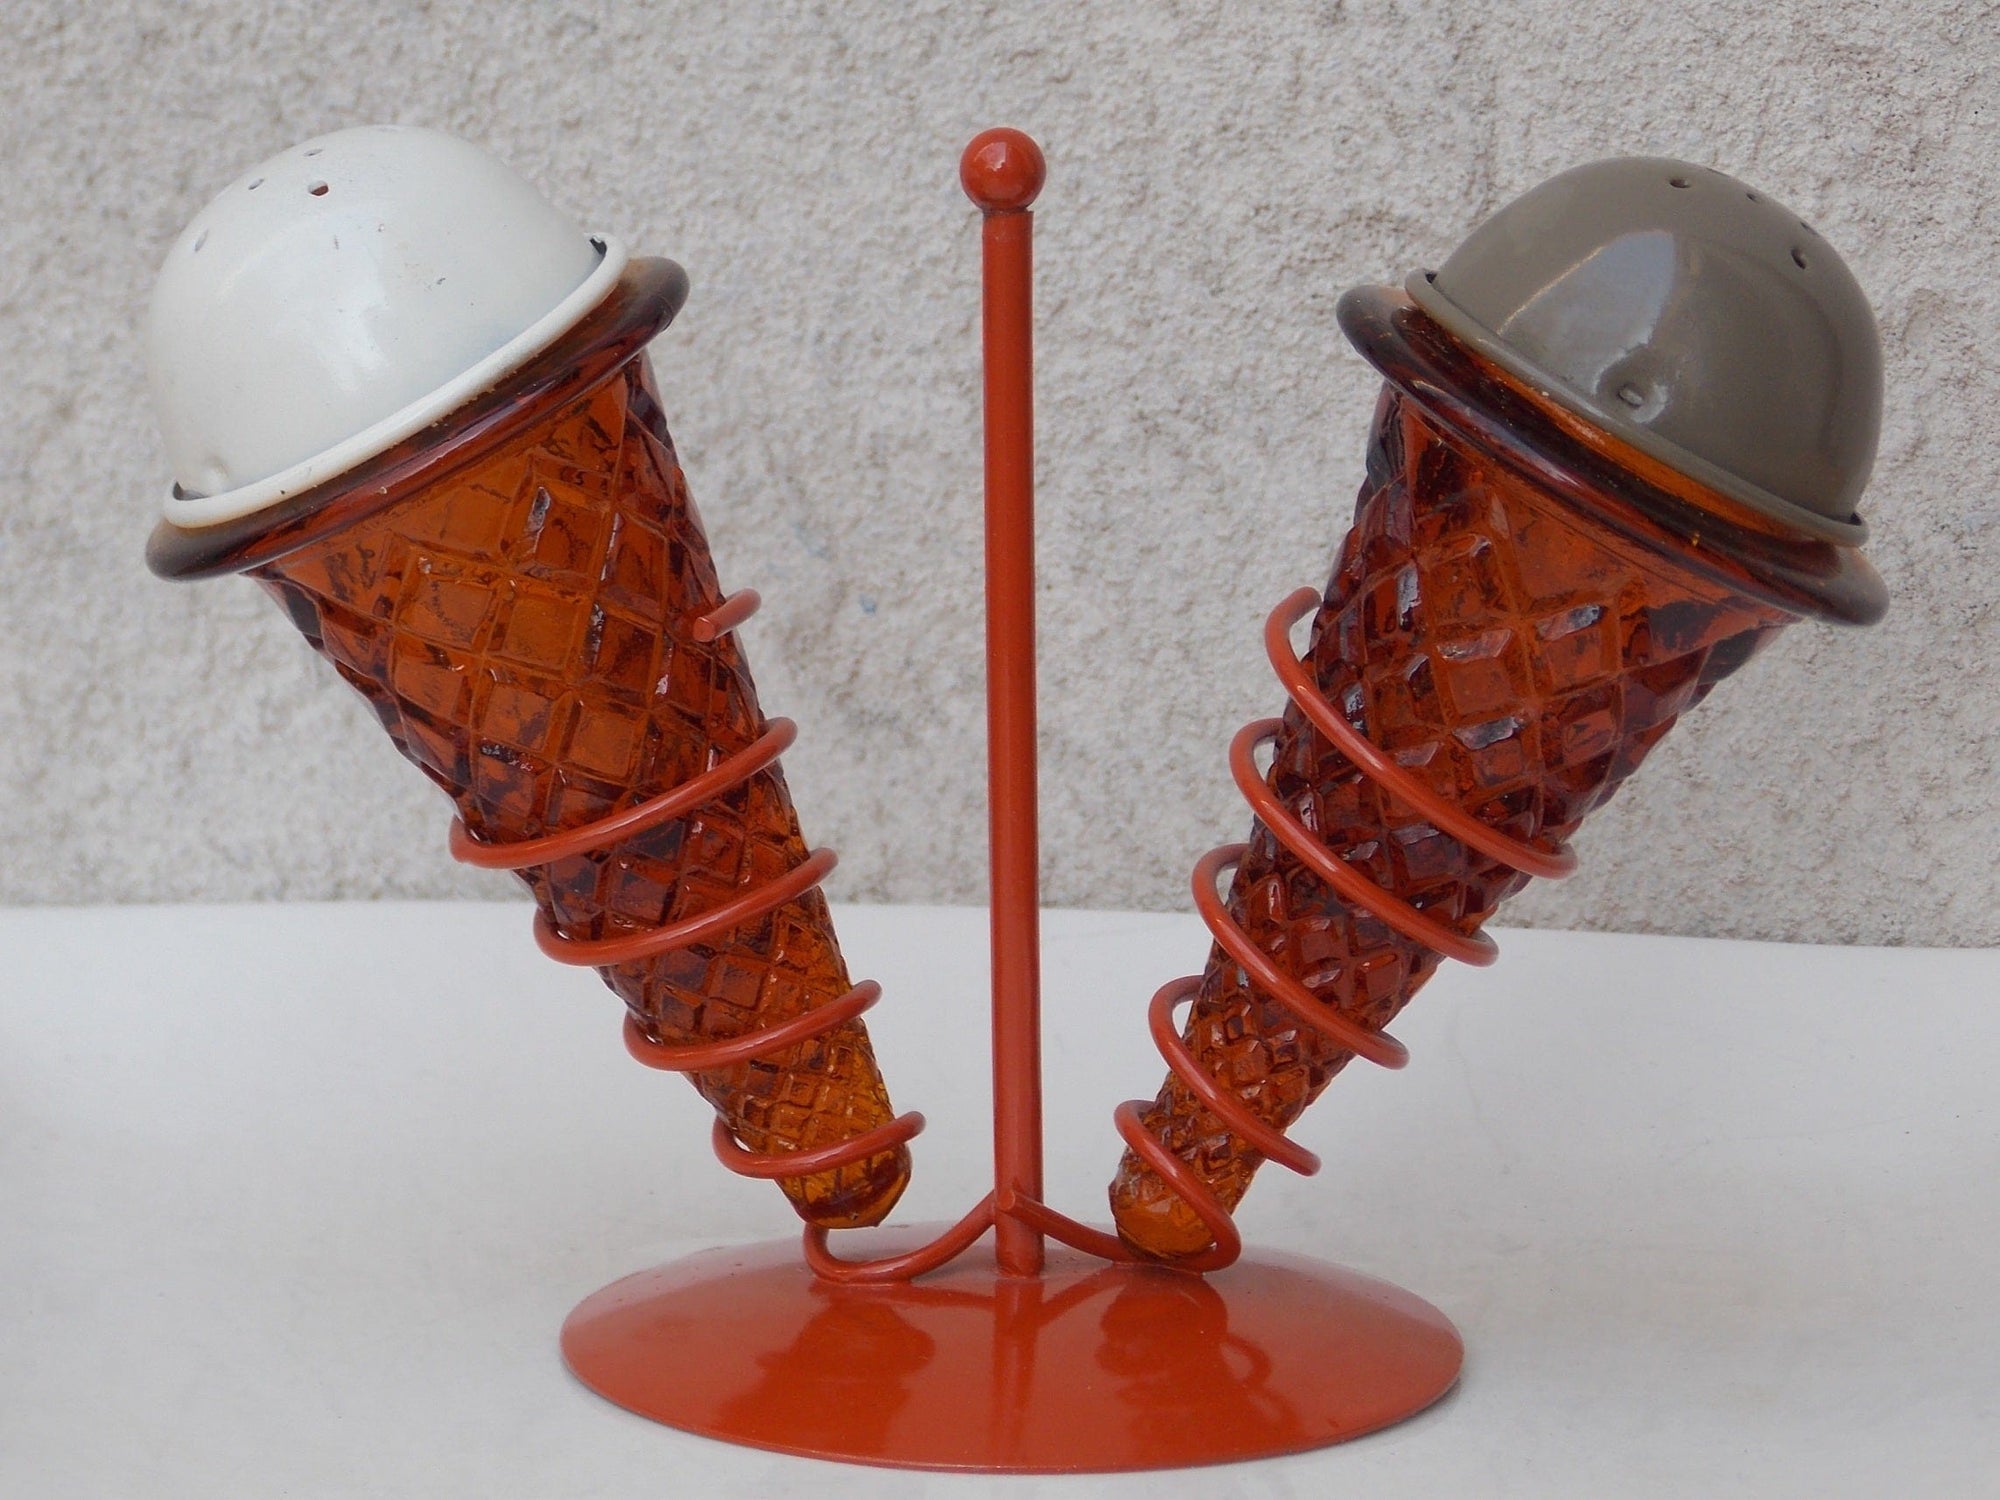 I Like Mike's Mid Century Modern Accessories Vintage Ice Cream Salt and Pepper Shaker Set, Made in Hong Kong